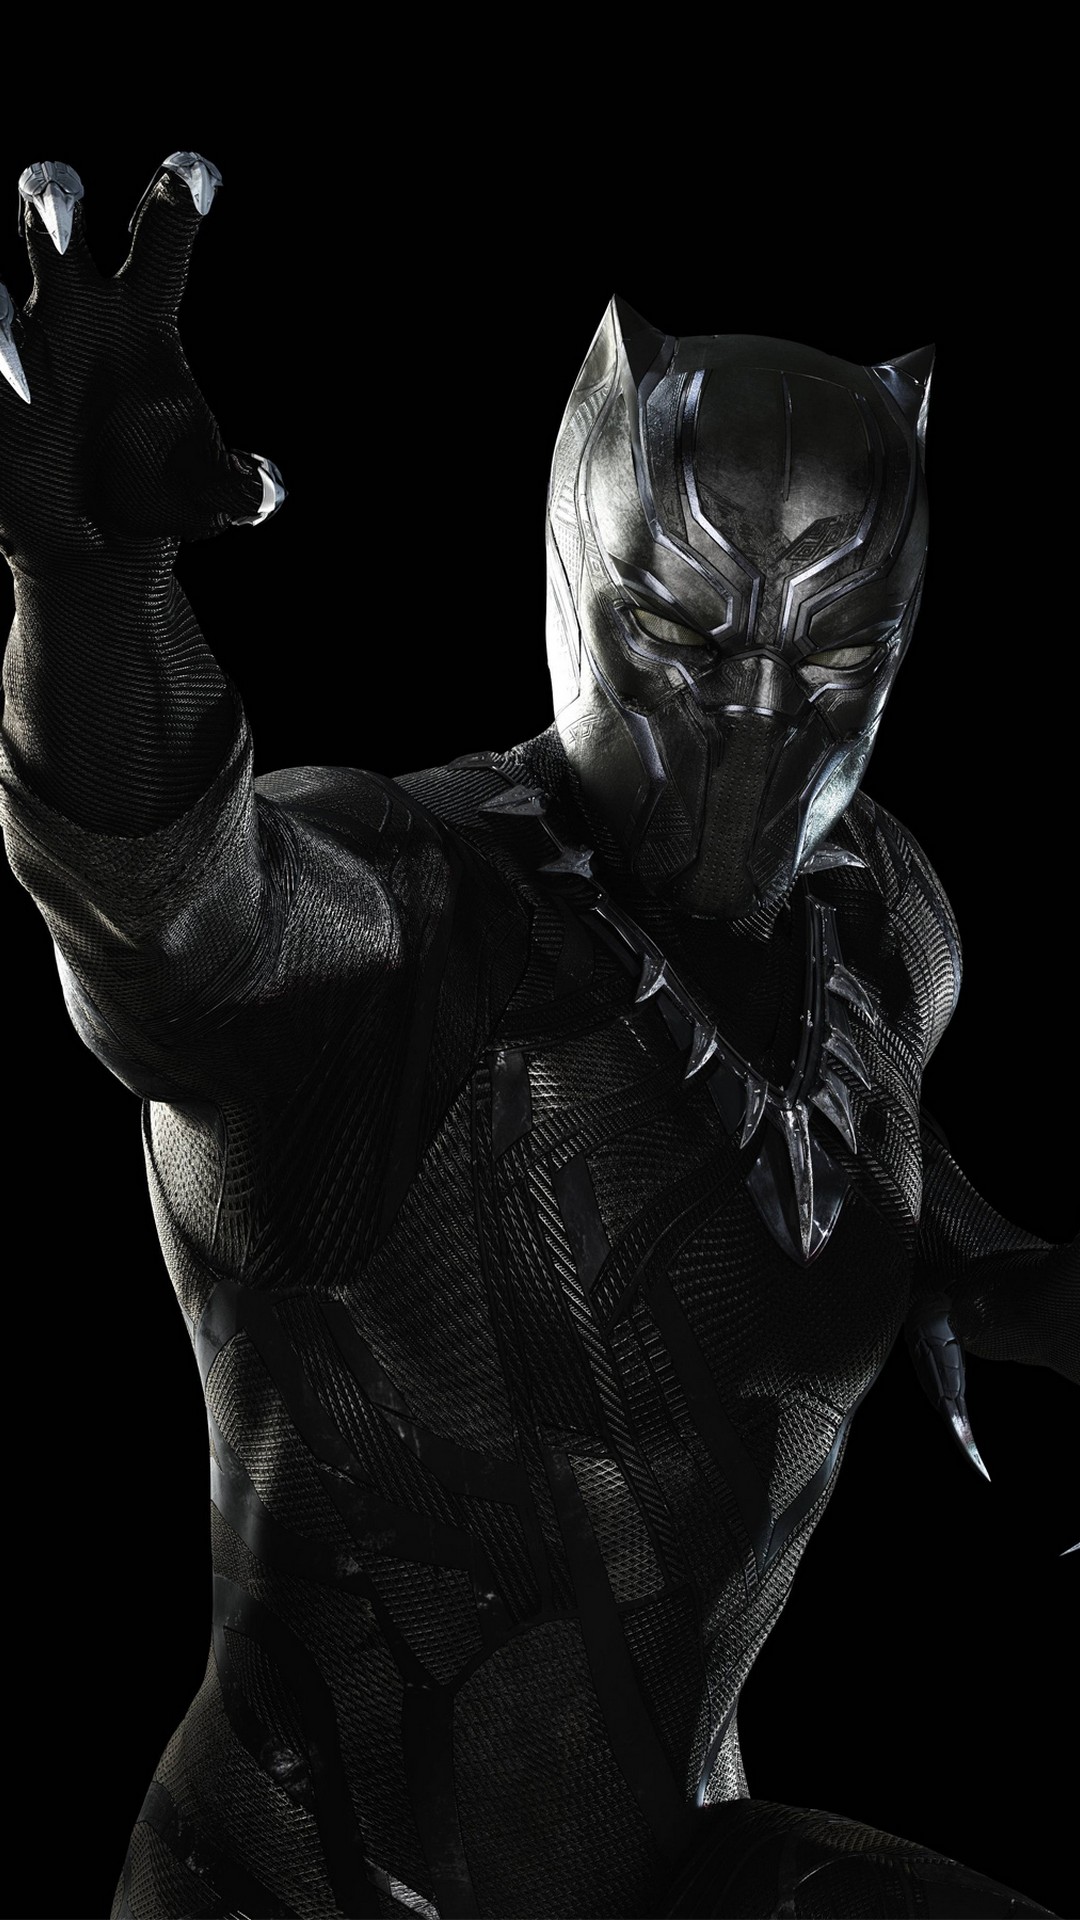 Black Panther i Phones Wallpaper with high-resolution 1080x1920 pixel. Download all Mobile Wallpapers and Use them as wallpapers for your iPhone, Tablet, iPad, Android and other mobile devices